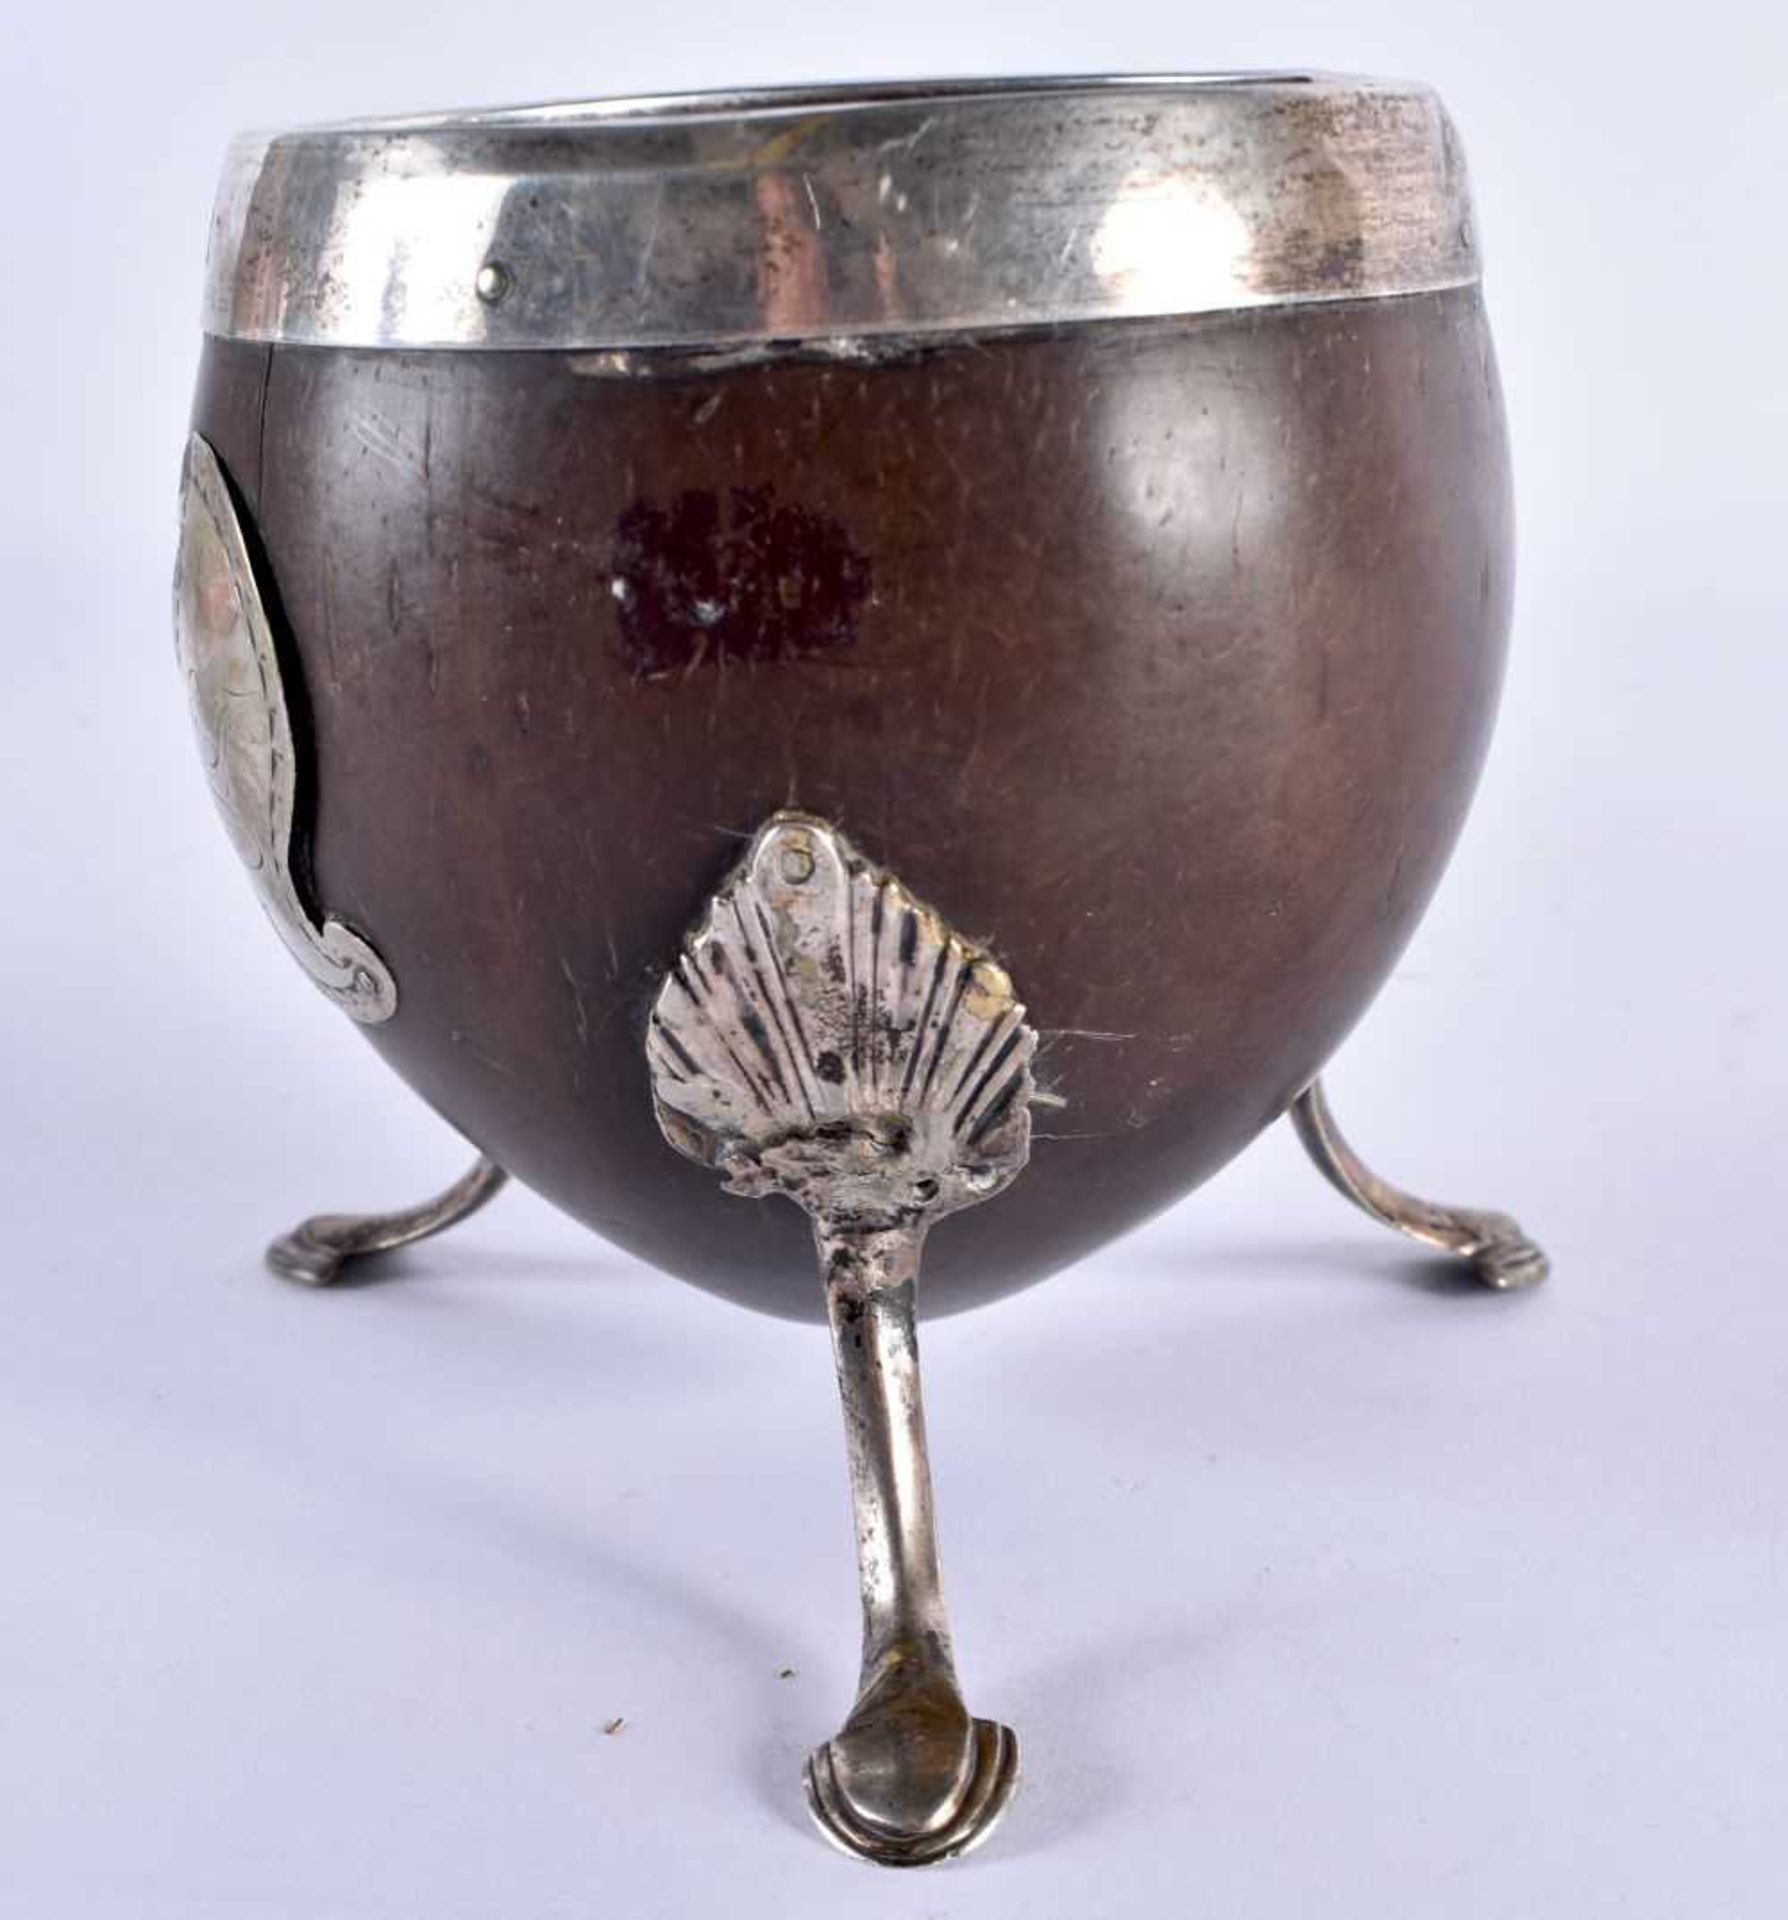 A GEORGE III WHITE METAL MOUNTED COCONUT CUP formed with a scrolling cartouche, upon splayed legs. - Image 2 of 5